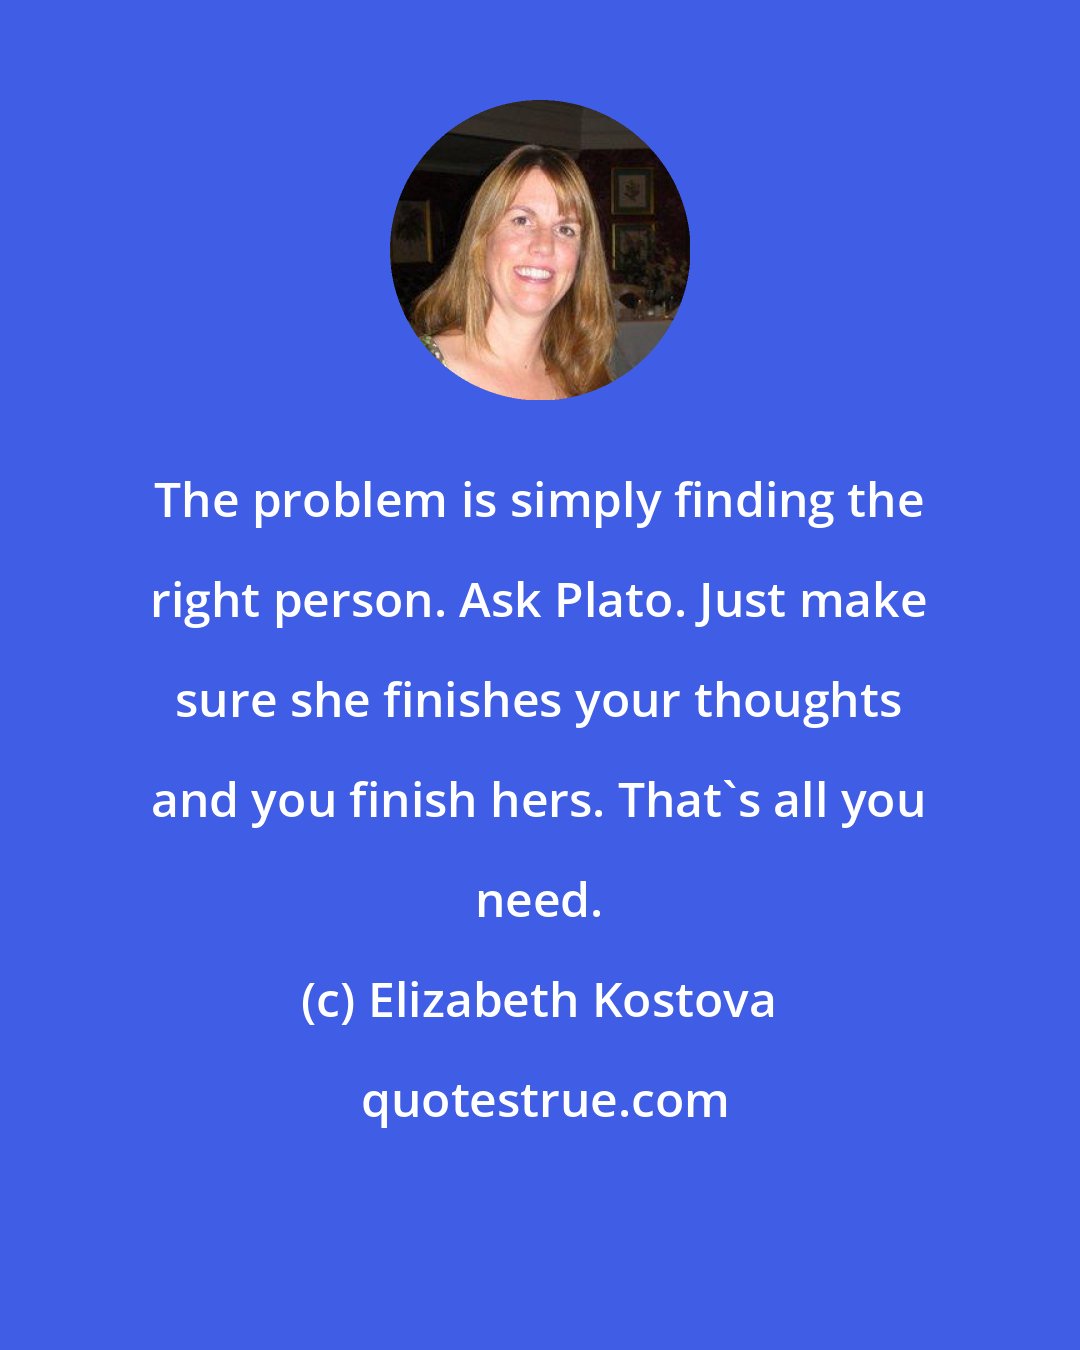 Elizabeth Kostova: The problem is simply finding the right person. Ask Plato. Just make sure she finishes your thoughts and you finish hers. That's all you need.